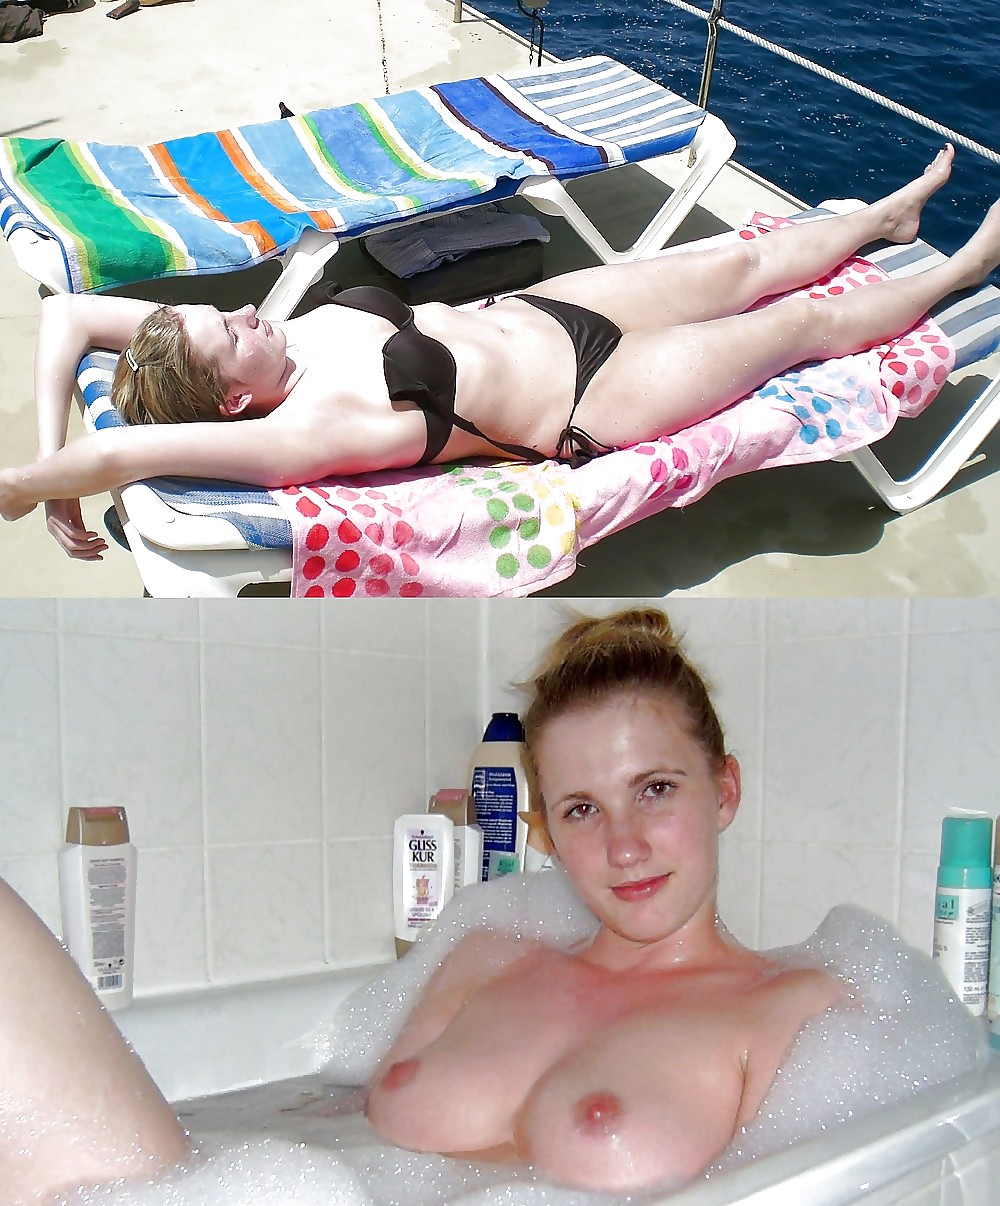 Free before and after more slut photos